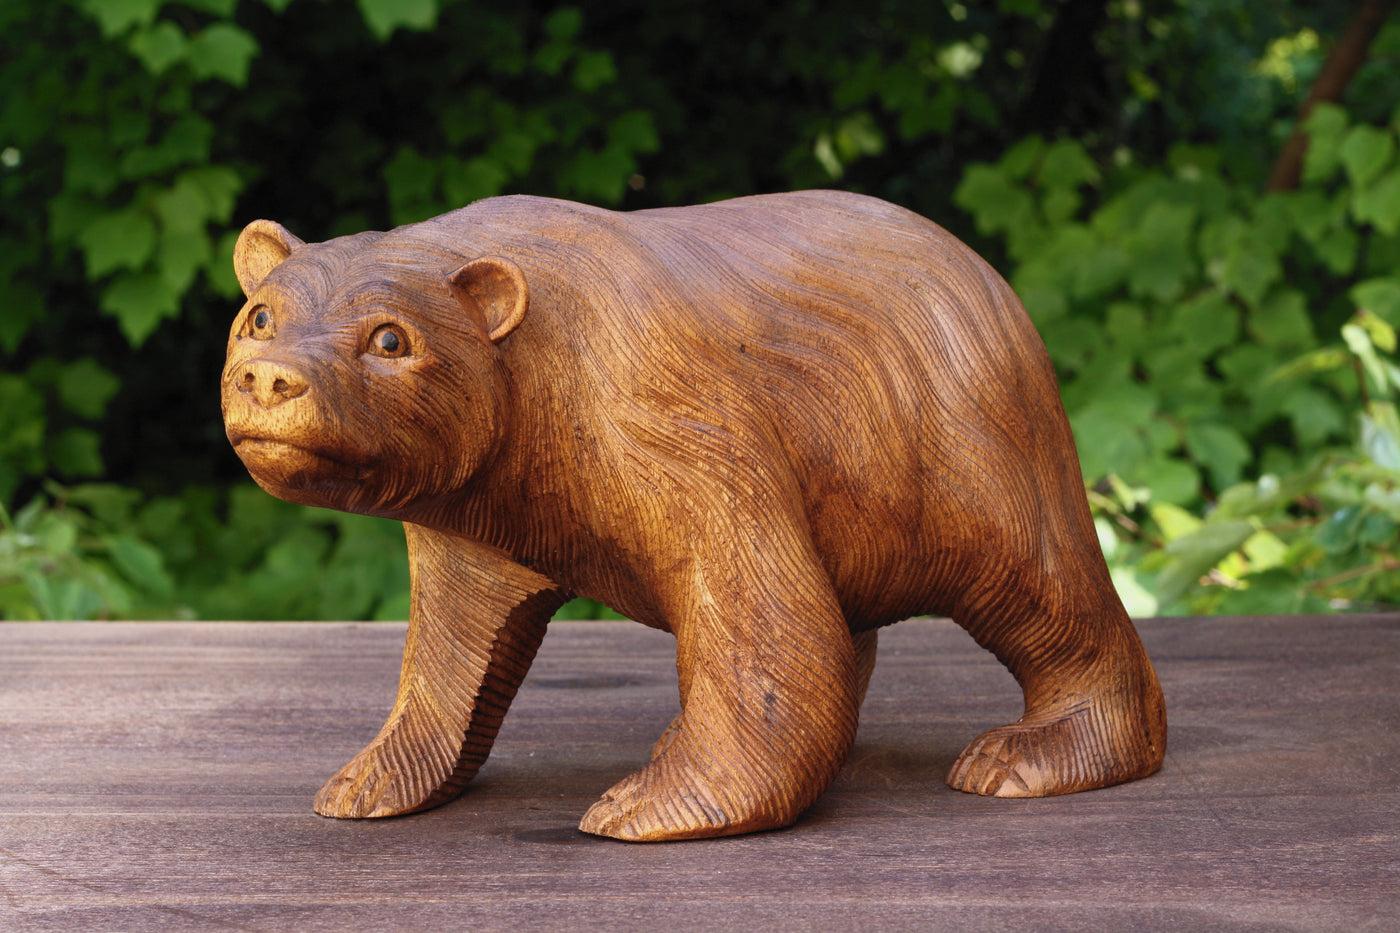 Wooden Hand Carved Bear Statue Handcrafted Handmade Figurine Sculpture Lodge Cabin Home Decor Accent Decoration Art